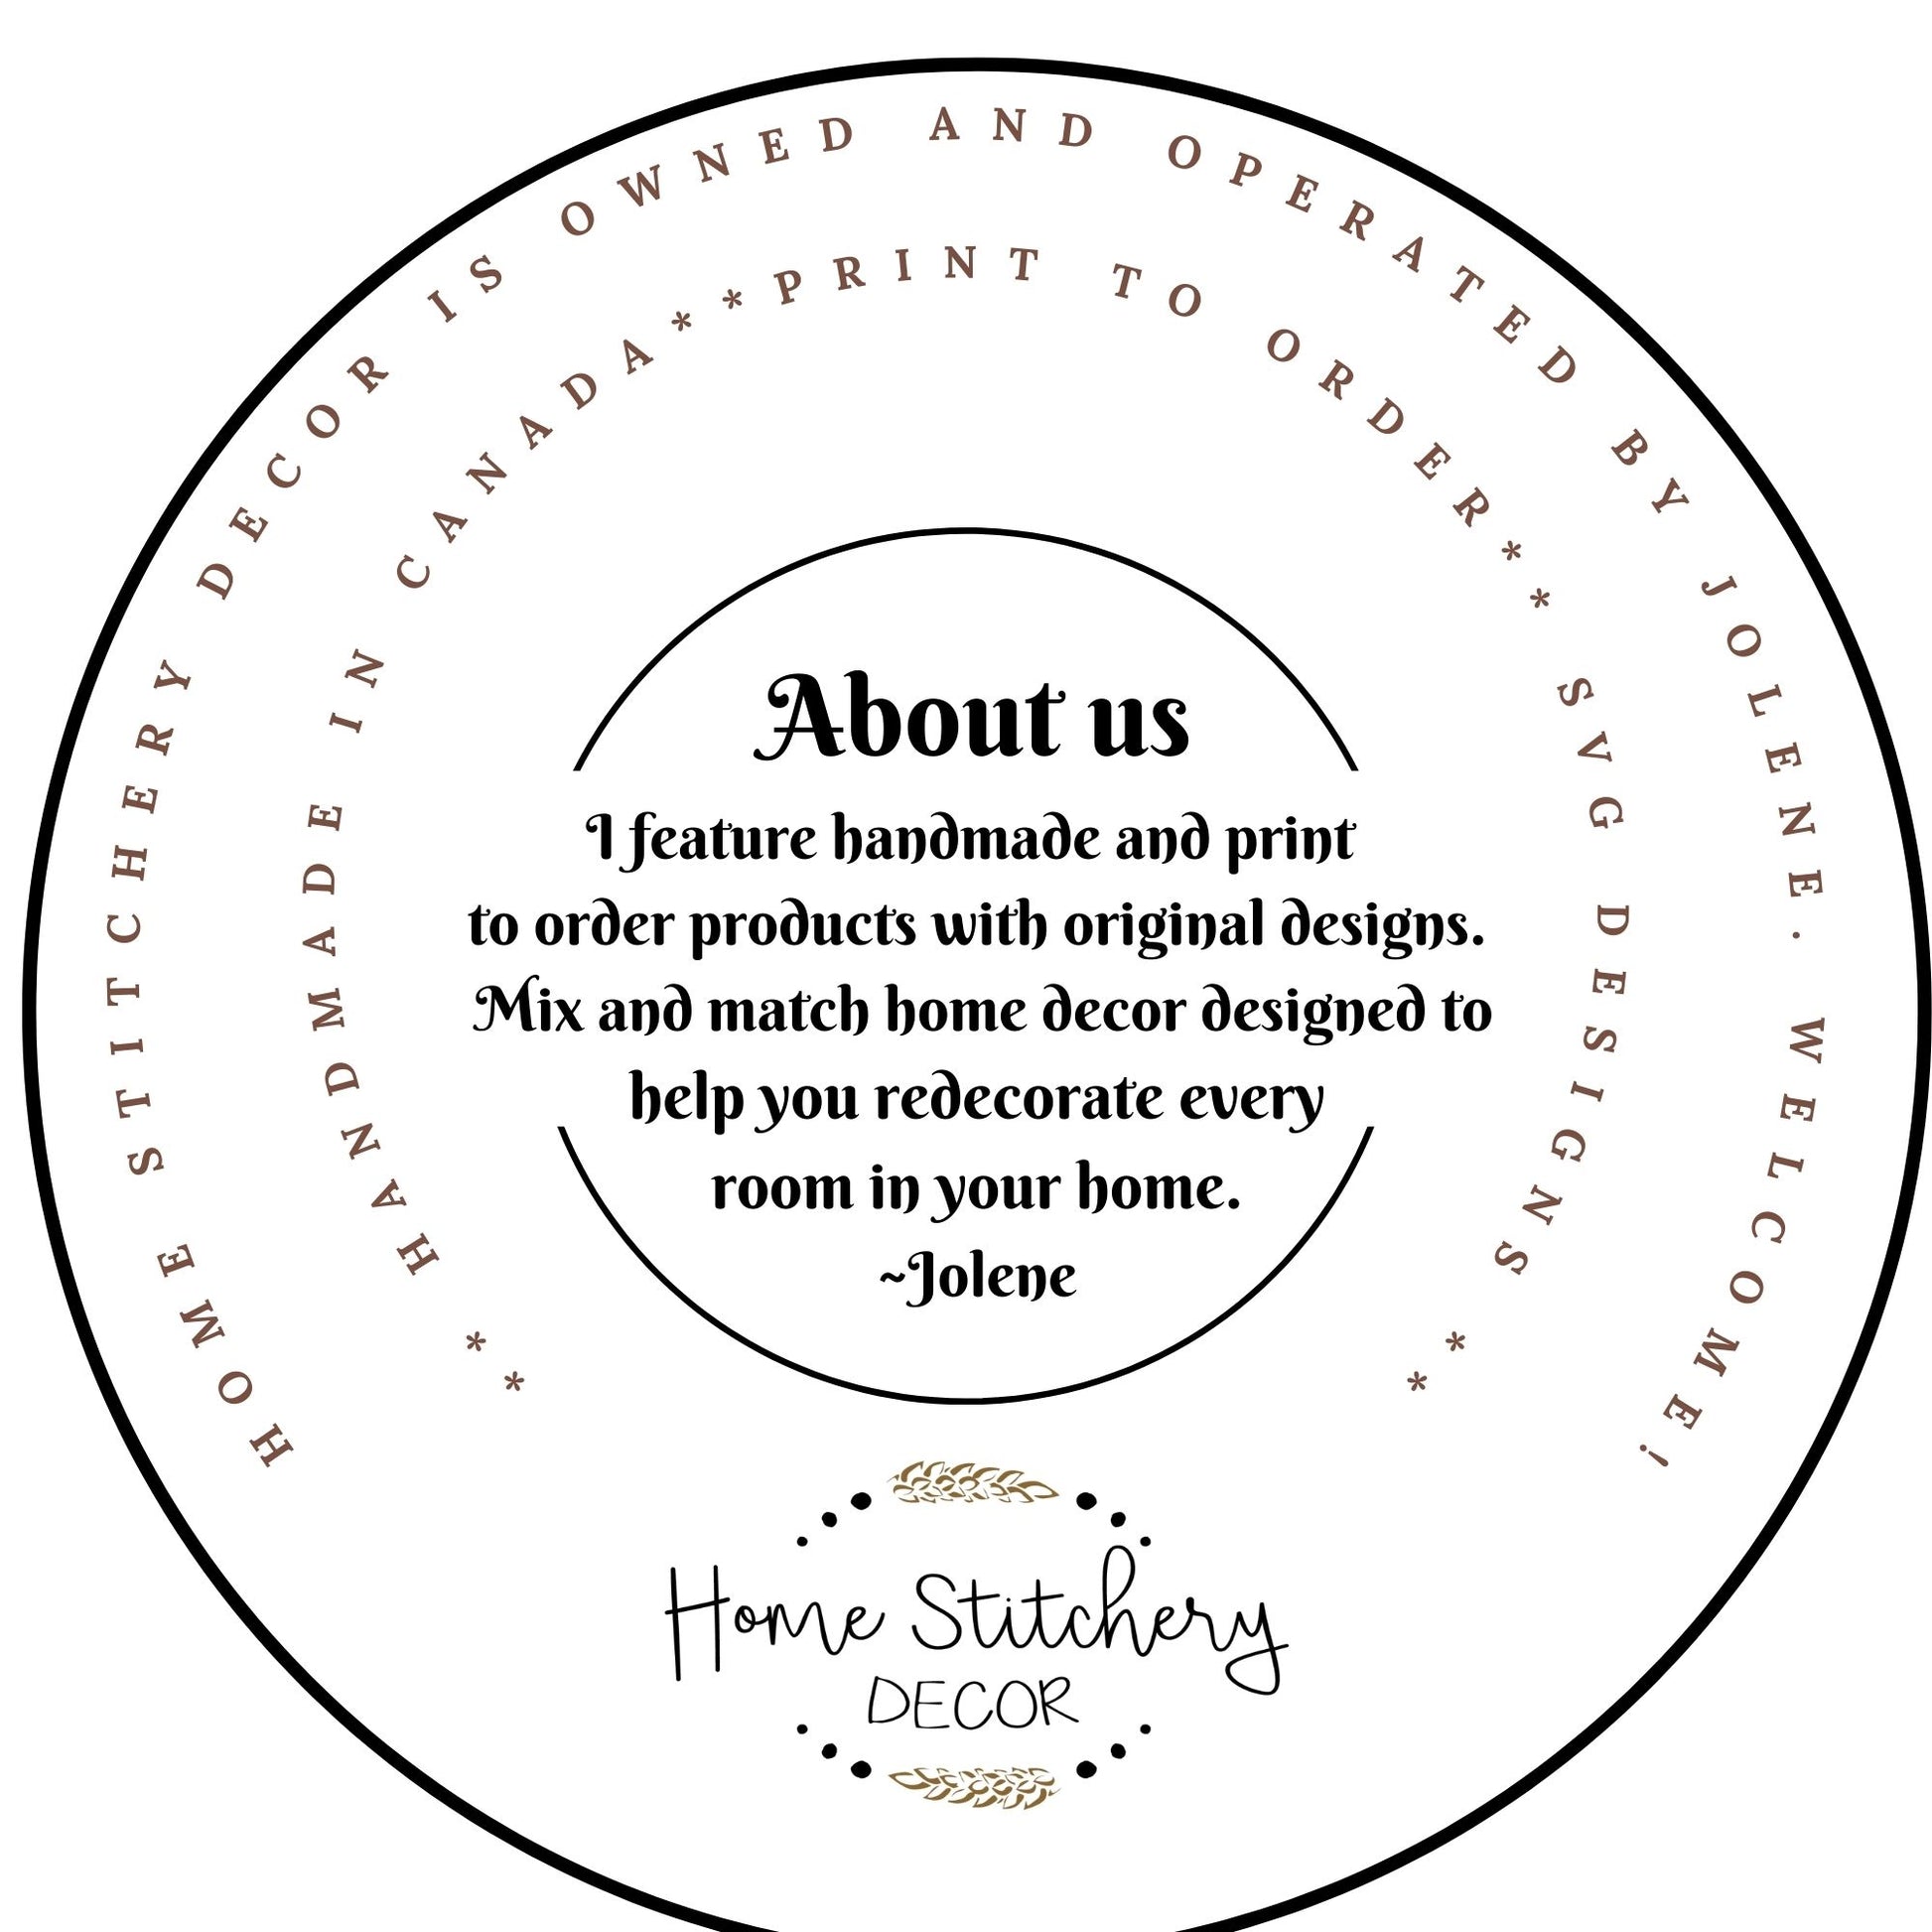 Home Stitchery Decor About Us.  We feature handmade and print to order products. Mix and match home decor that's giftable for every occassion.